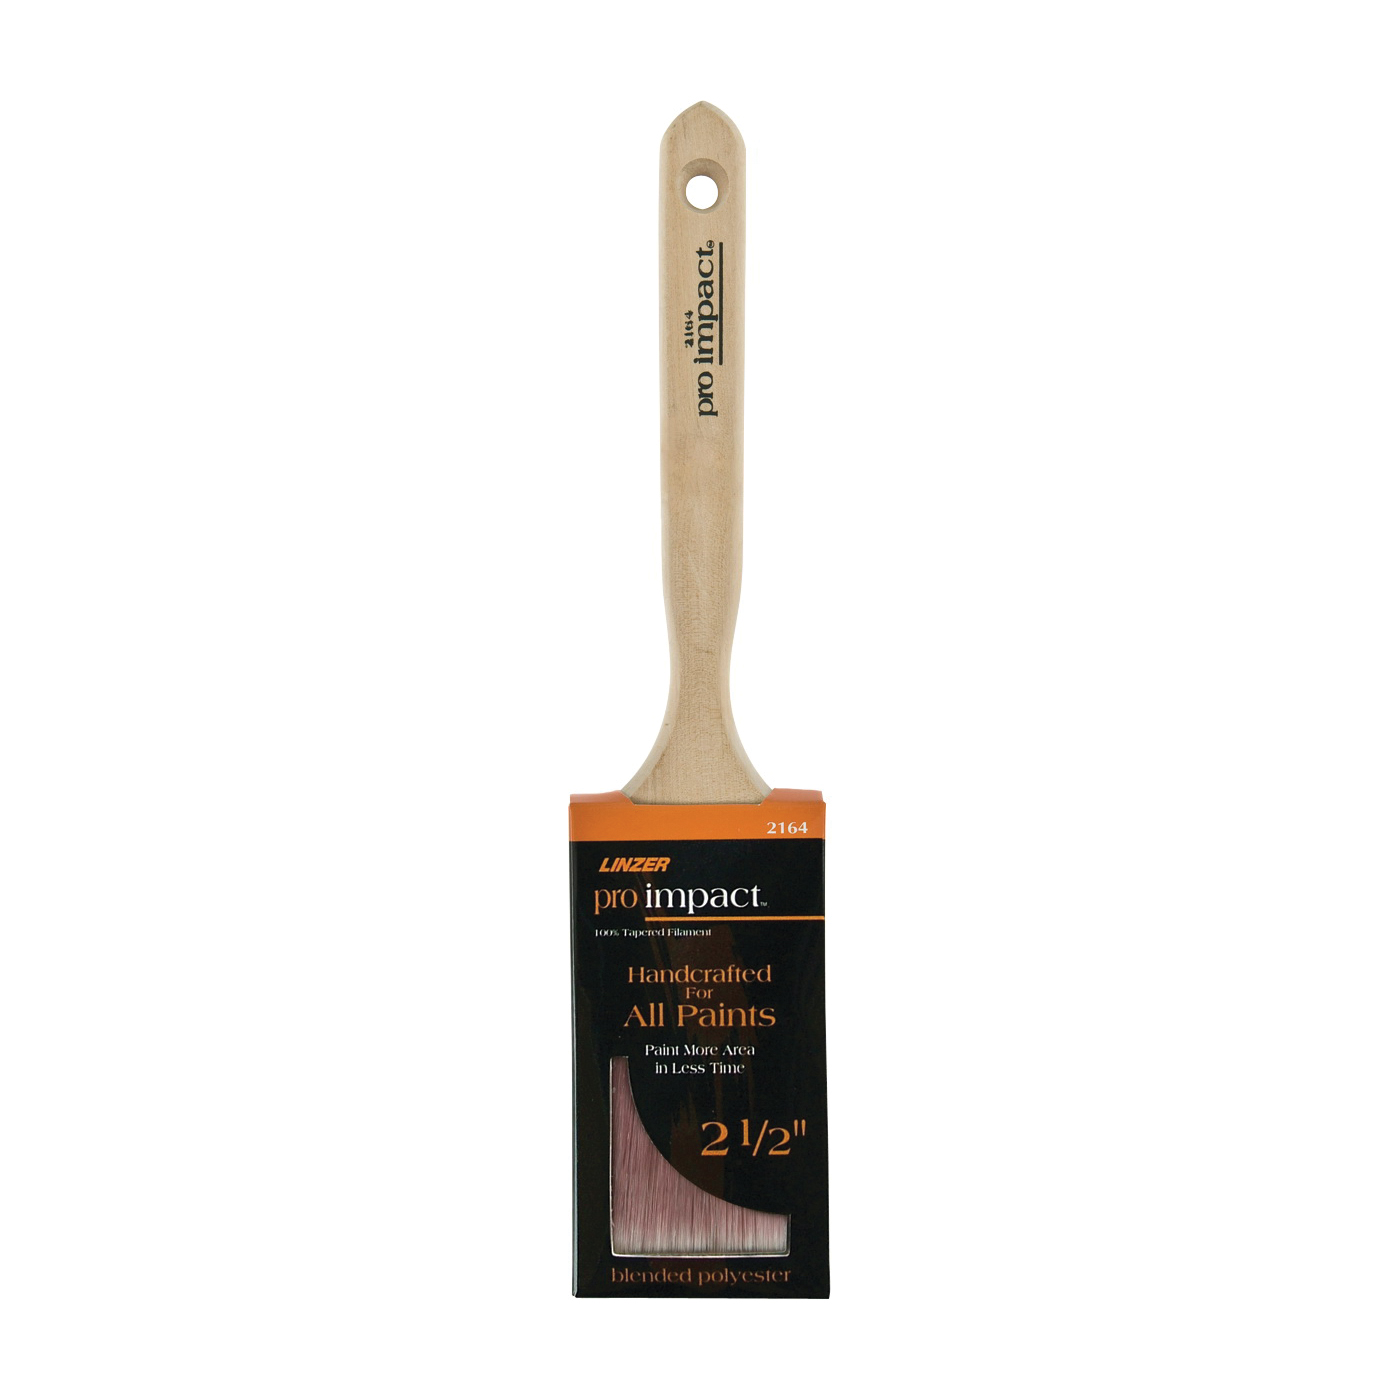 Linzer WC 2164-2.5 Paint Brush, 2-1/2 in W, 2-3/4 in L Bristle, Polyester Bristle, Sash Handle